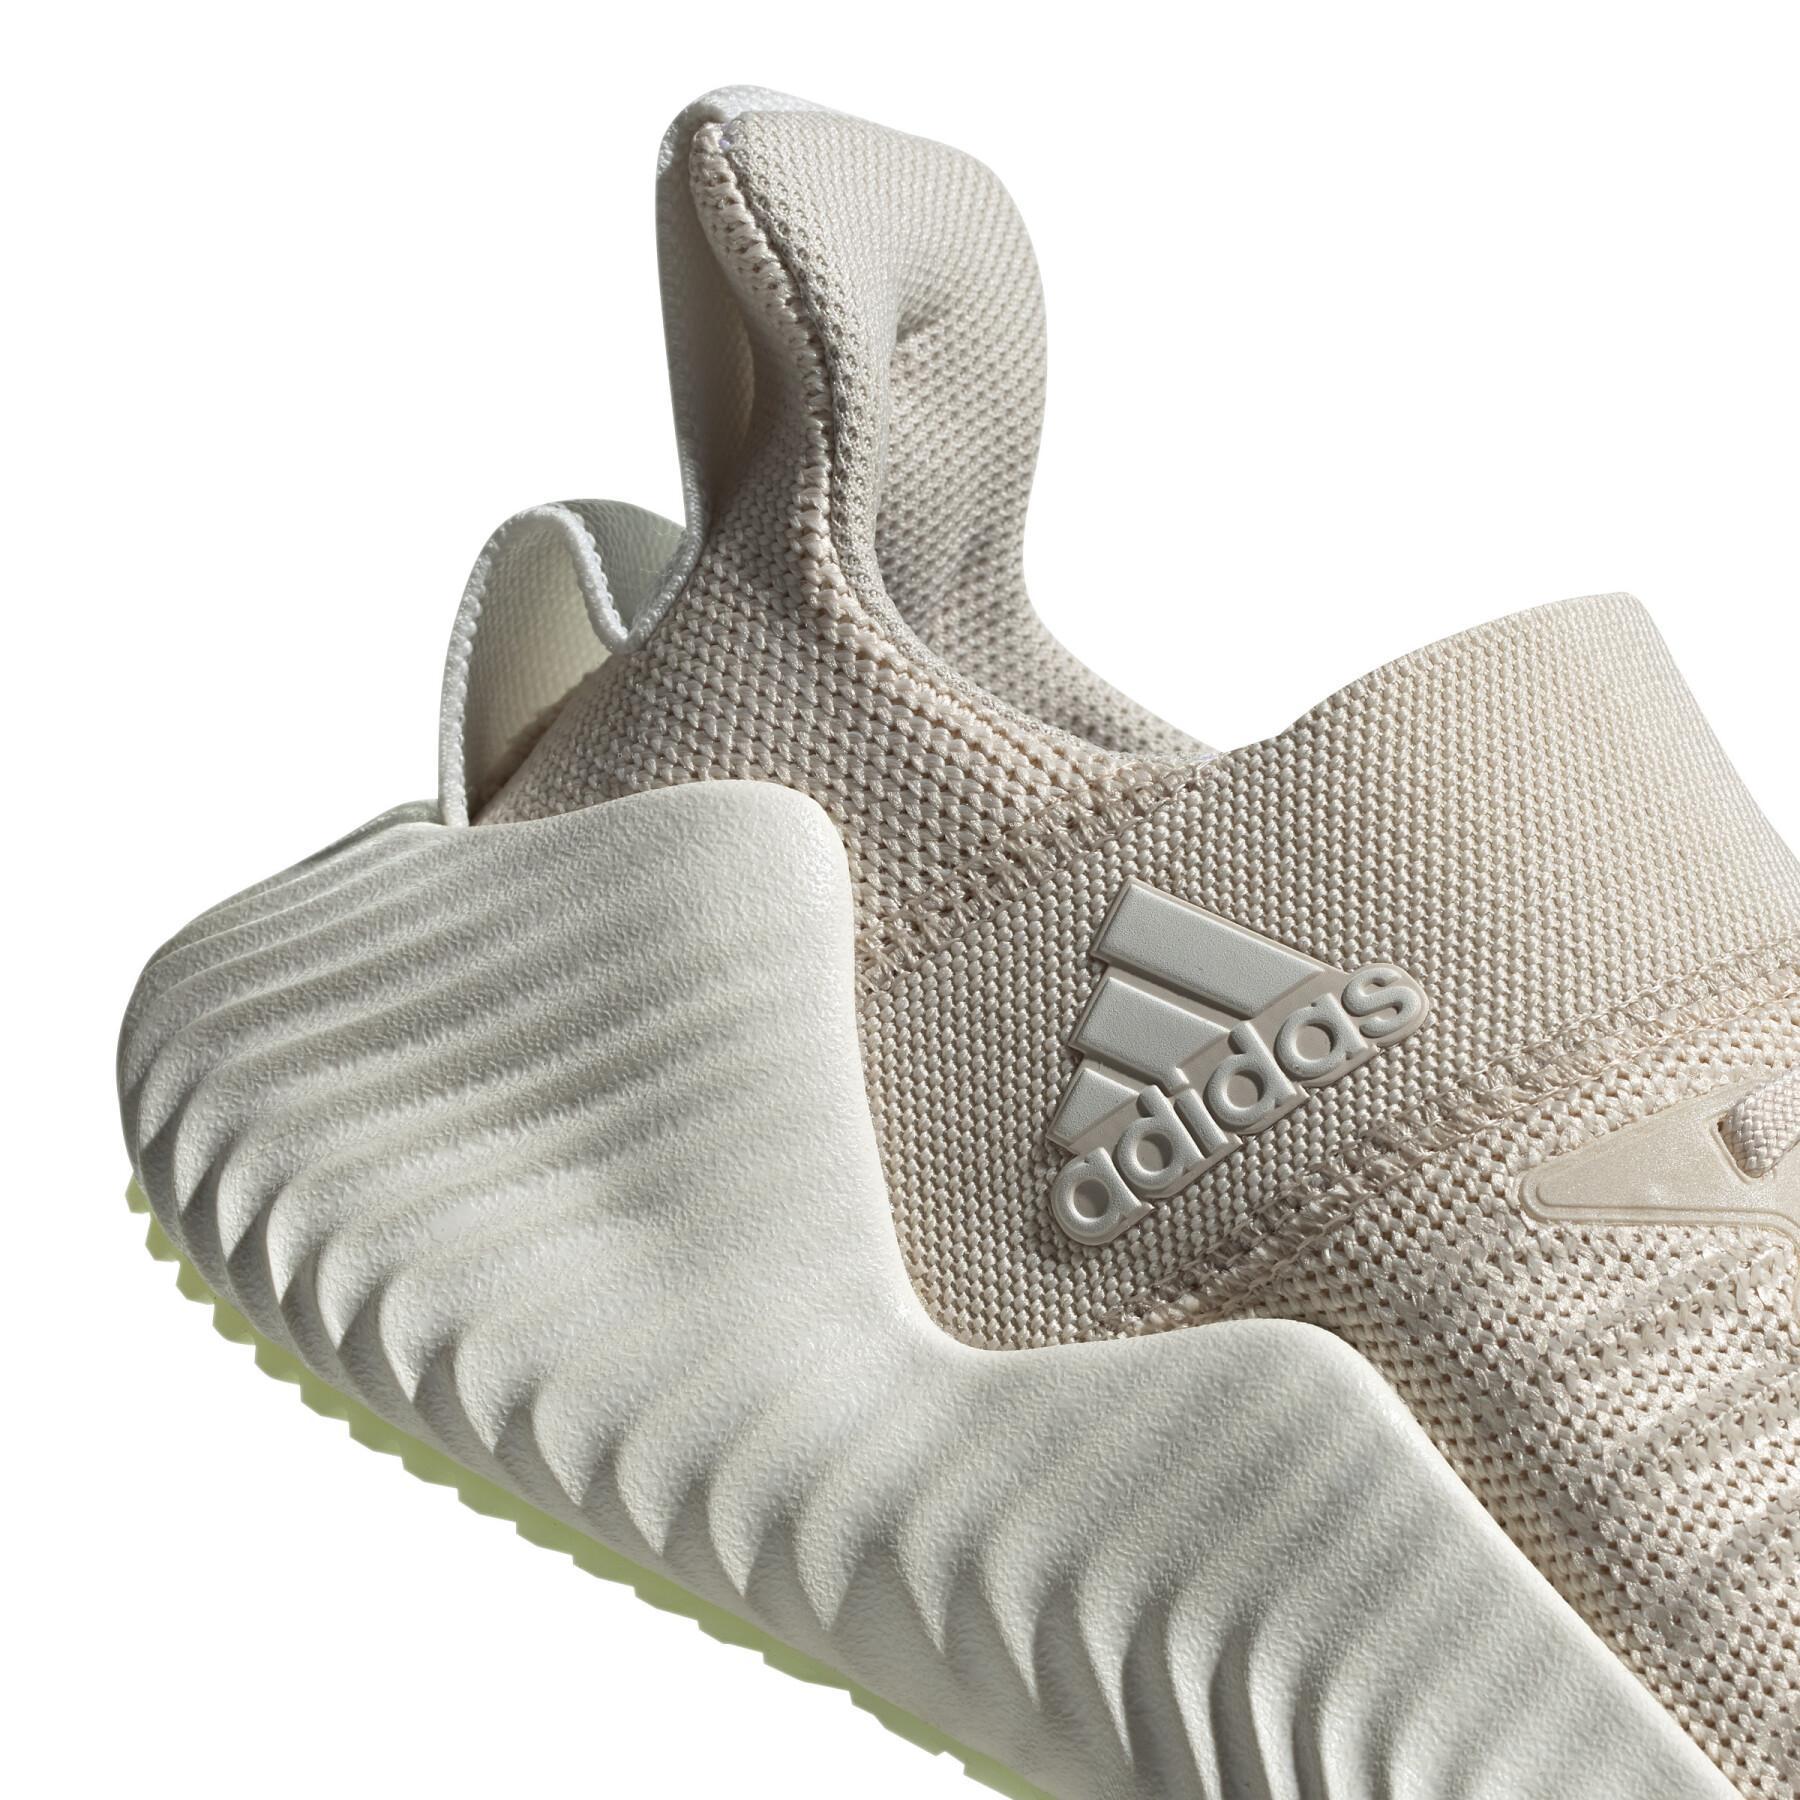 Women's shoes adidas Alphabounce Trainer